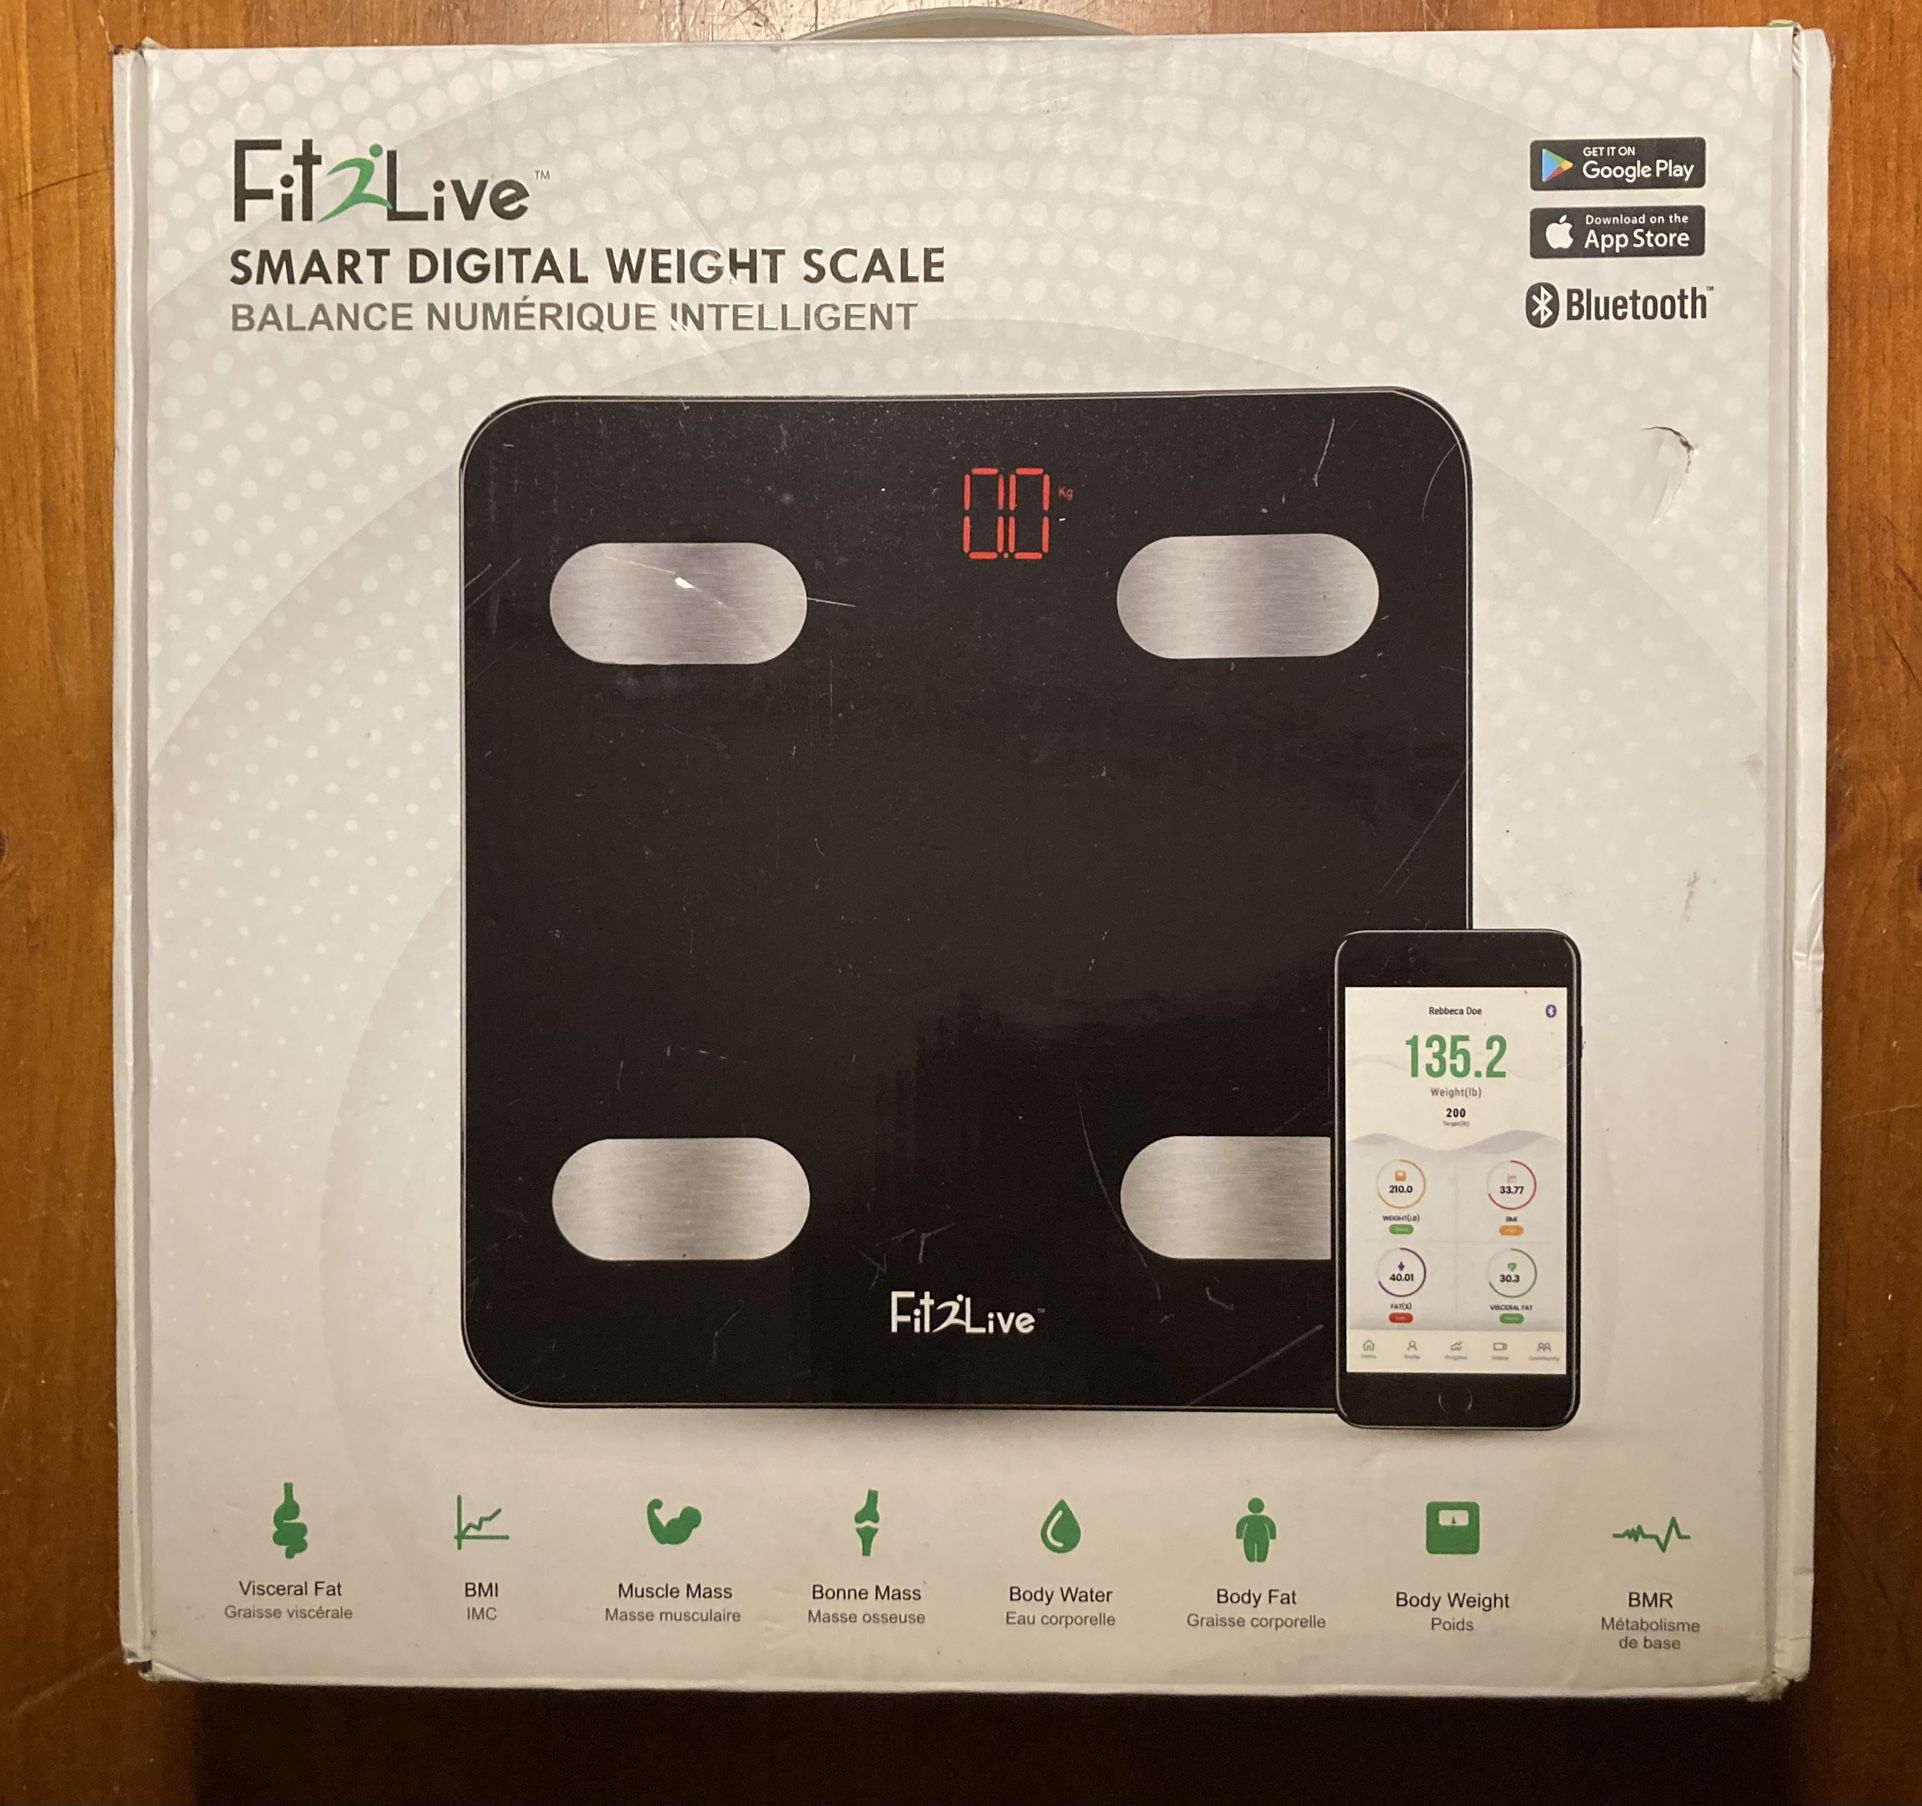 Fit2Live Bluetooth Smart Digital Weight Scale